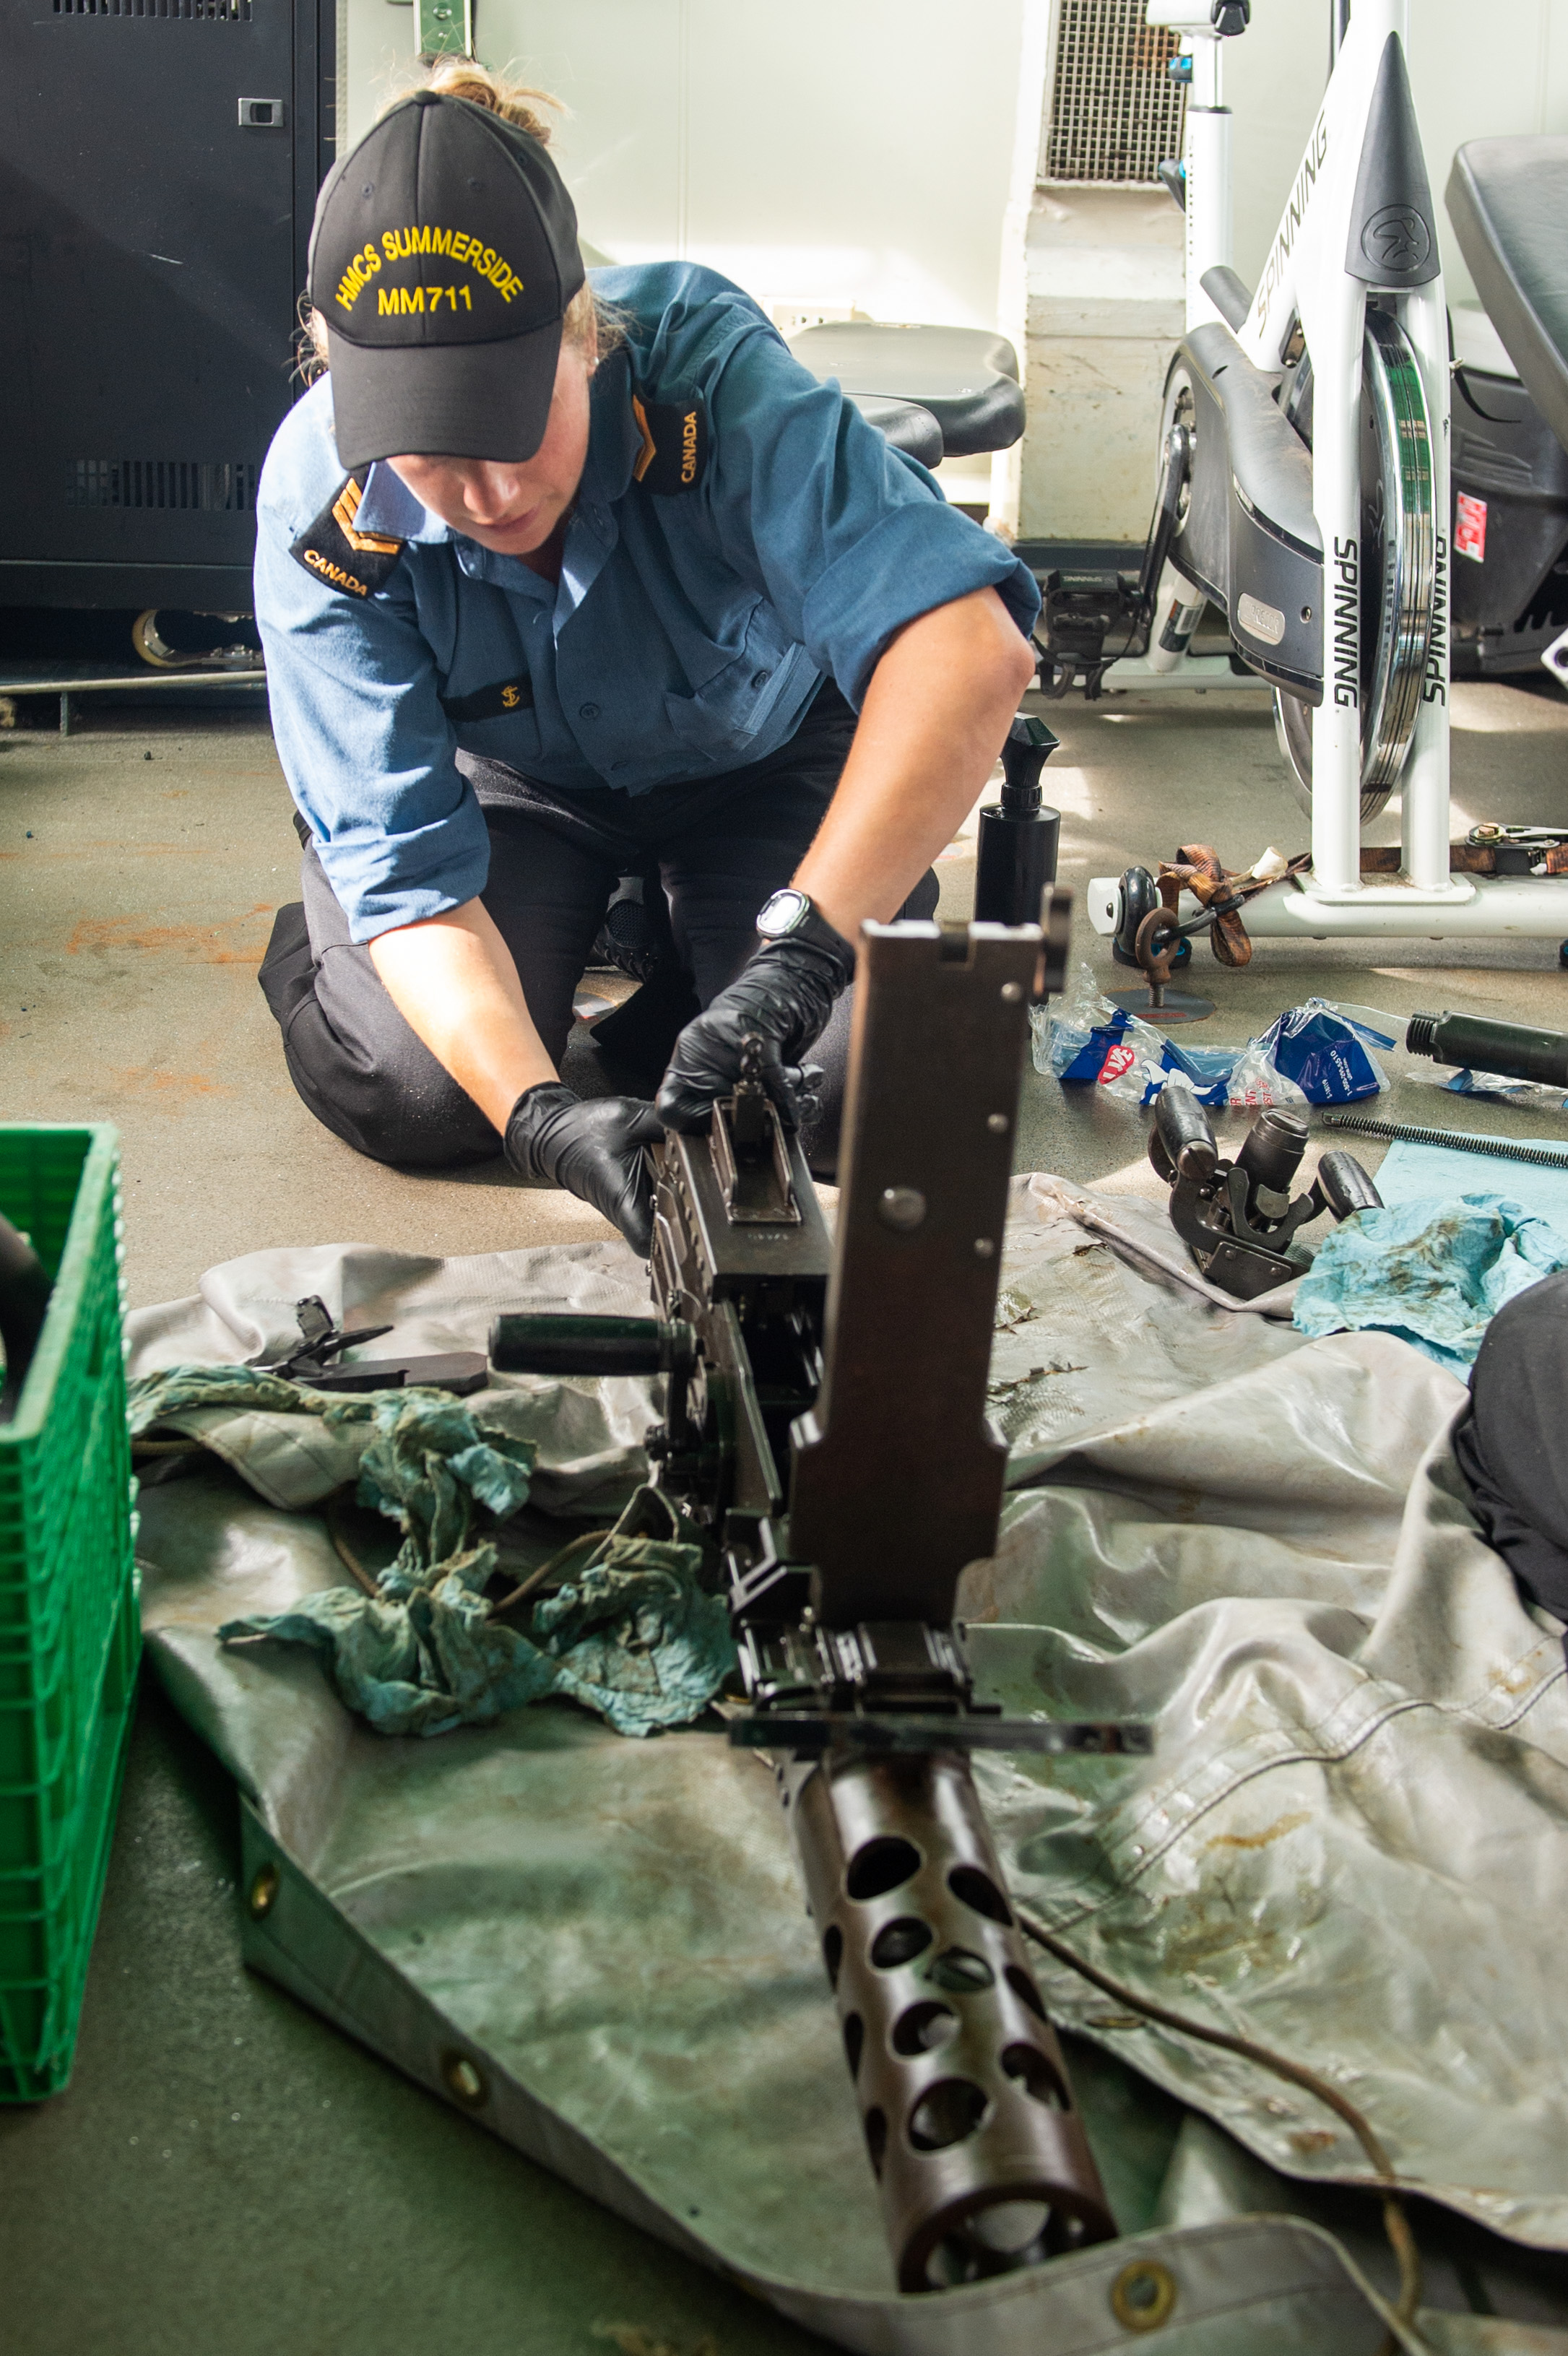 A Royal Canadian Navy member cleans the .50 calibre heavy machine gun onboard HMCS Summerside while sailing in the Atlantic Ocean during Operation CARIBBE on November 2, 2020.